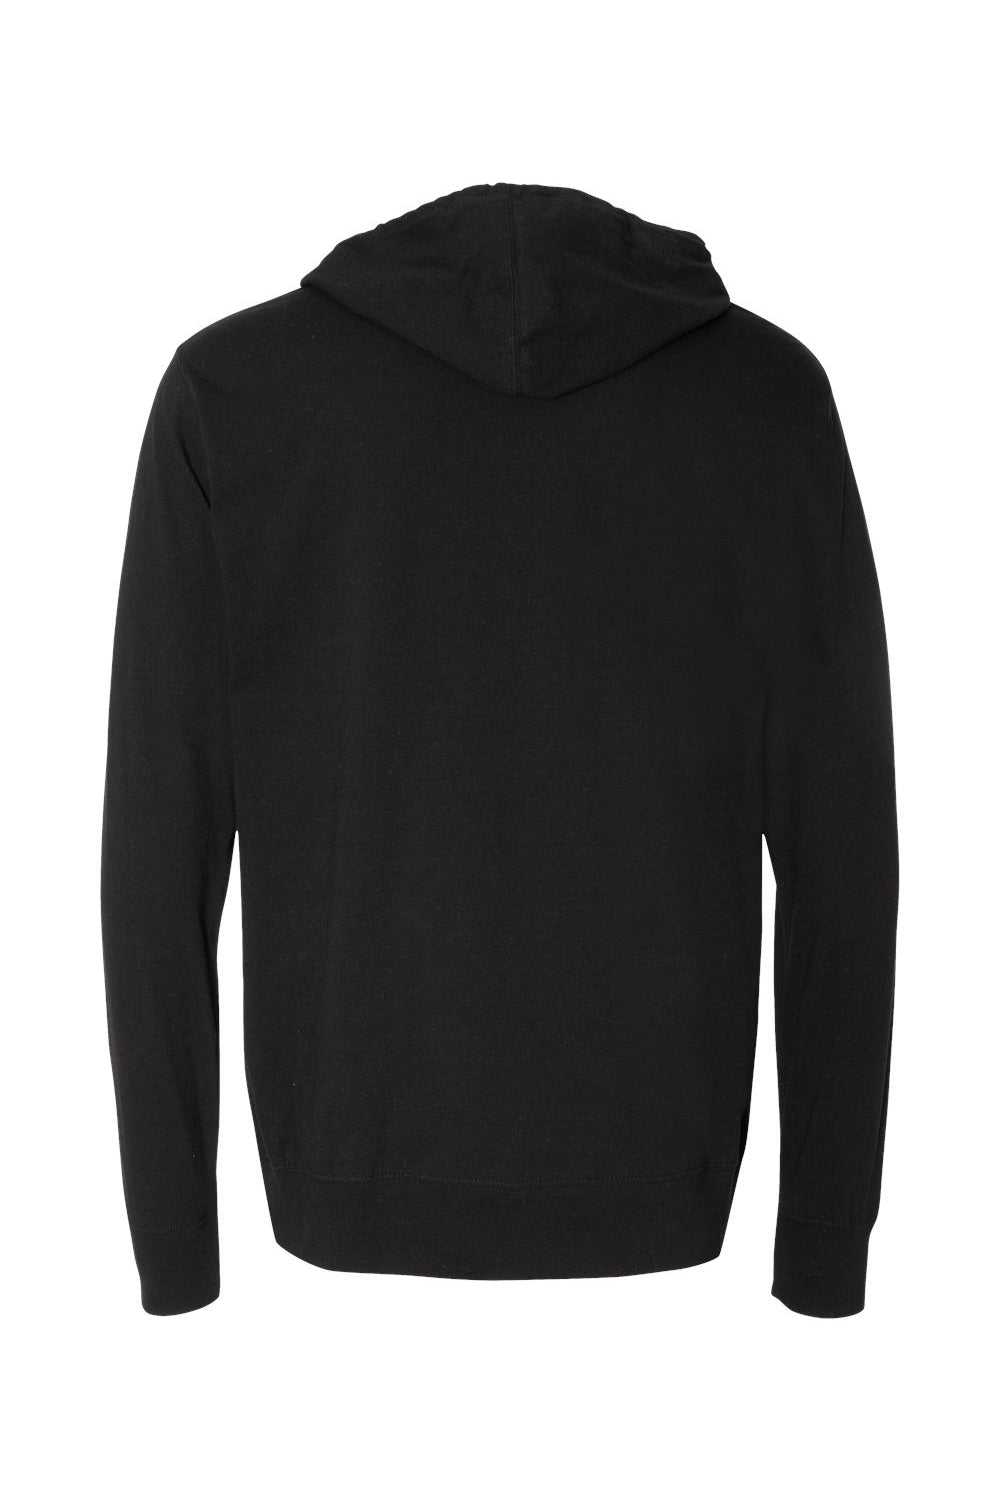 Independent Trading Co. SS150J Mens Long Sleeve Hooded T-Shirt Hoodie Black Flat Back